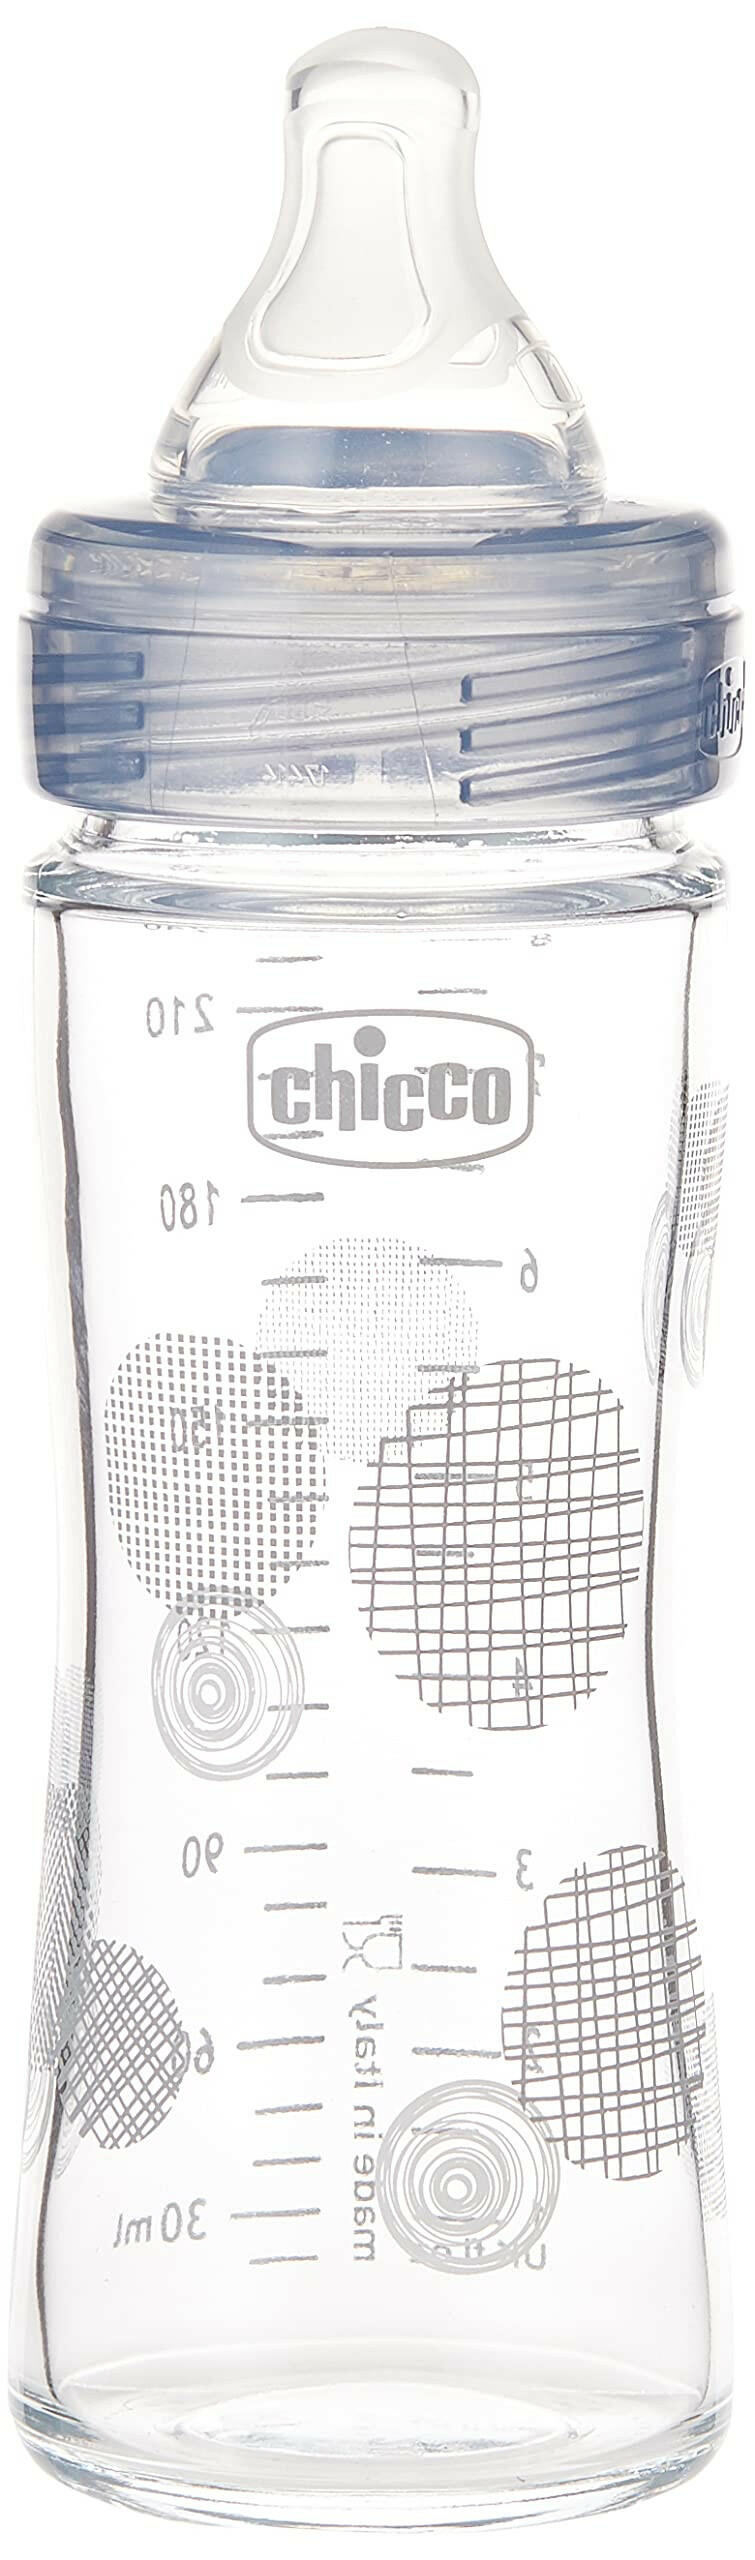 Chicco Baby Well Being Glass bottle Unisex - 240ML - Slow Flow - Silicone